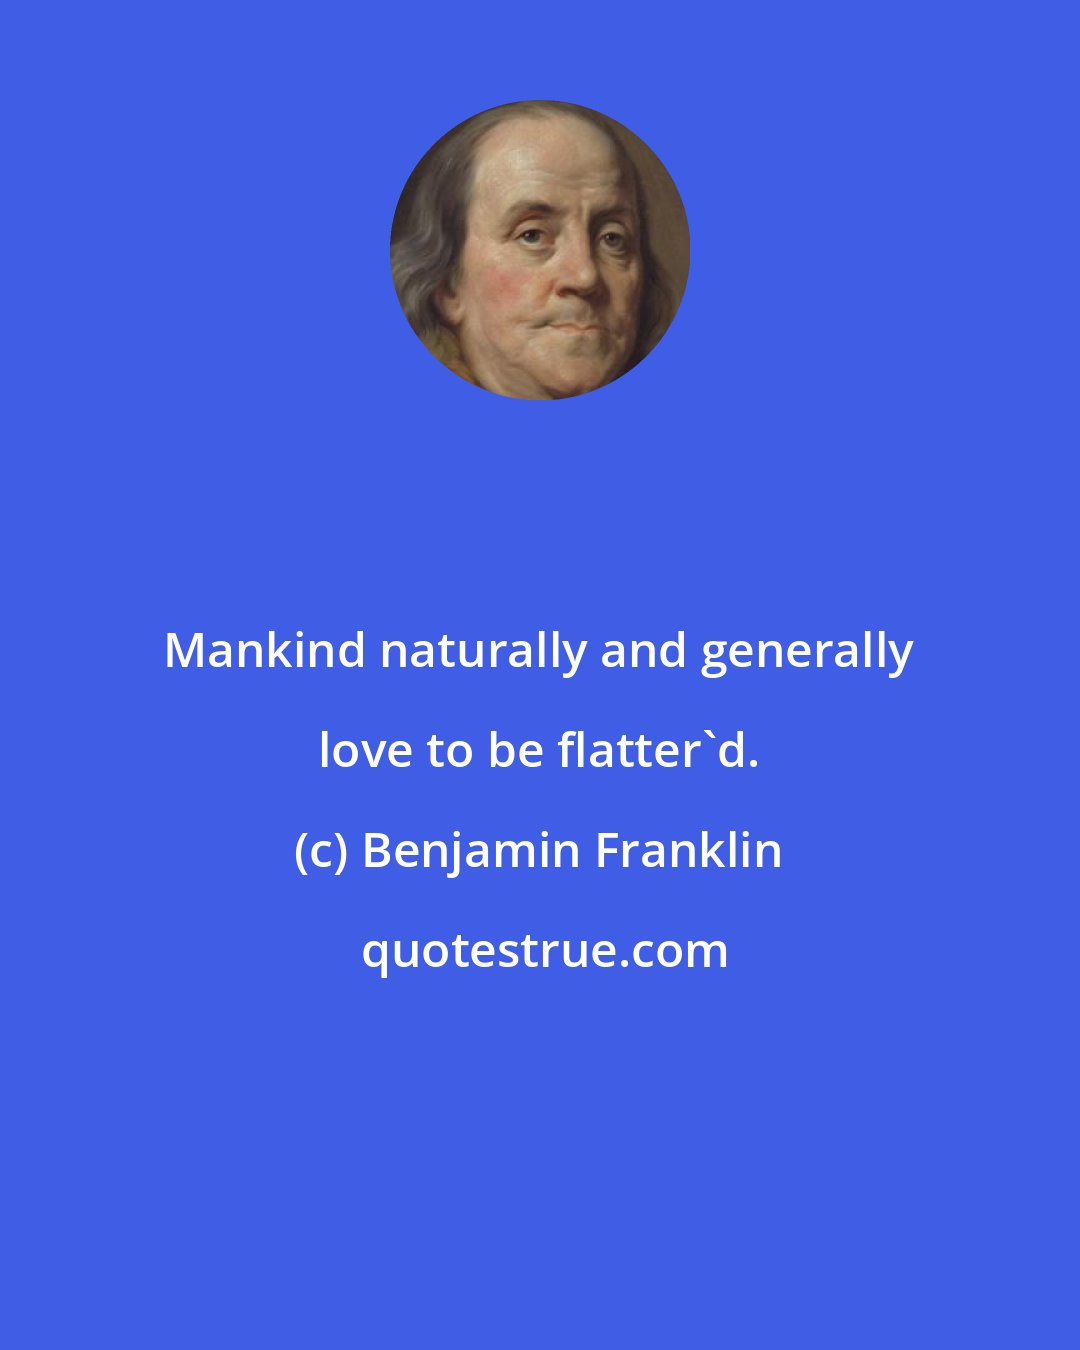 Benjamin Franklin: Mankind naturally and generally love to be flatter'd.